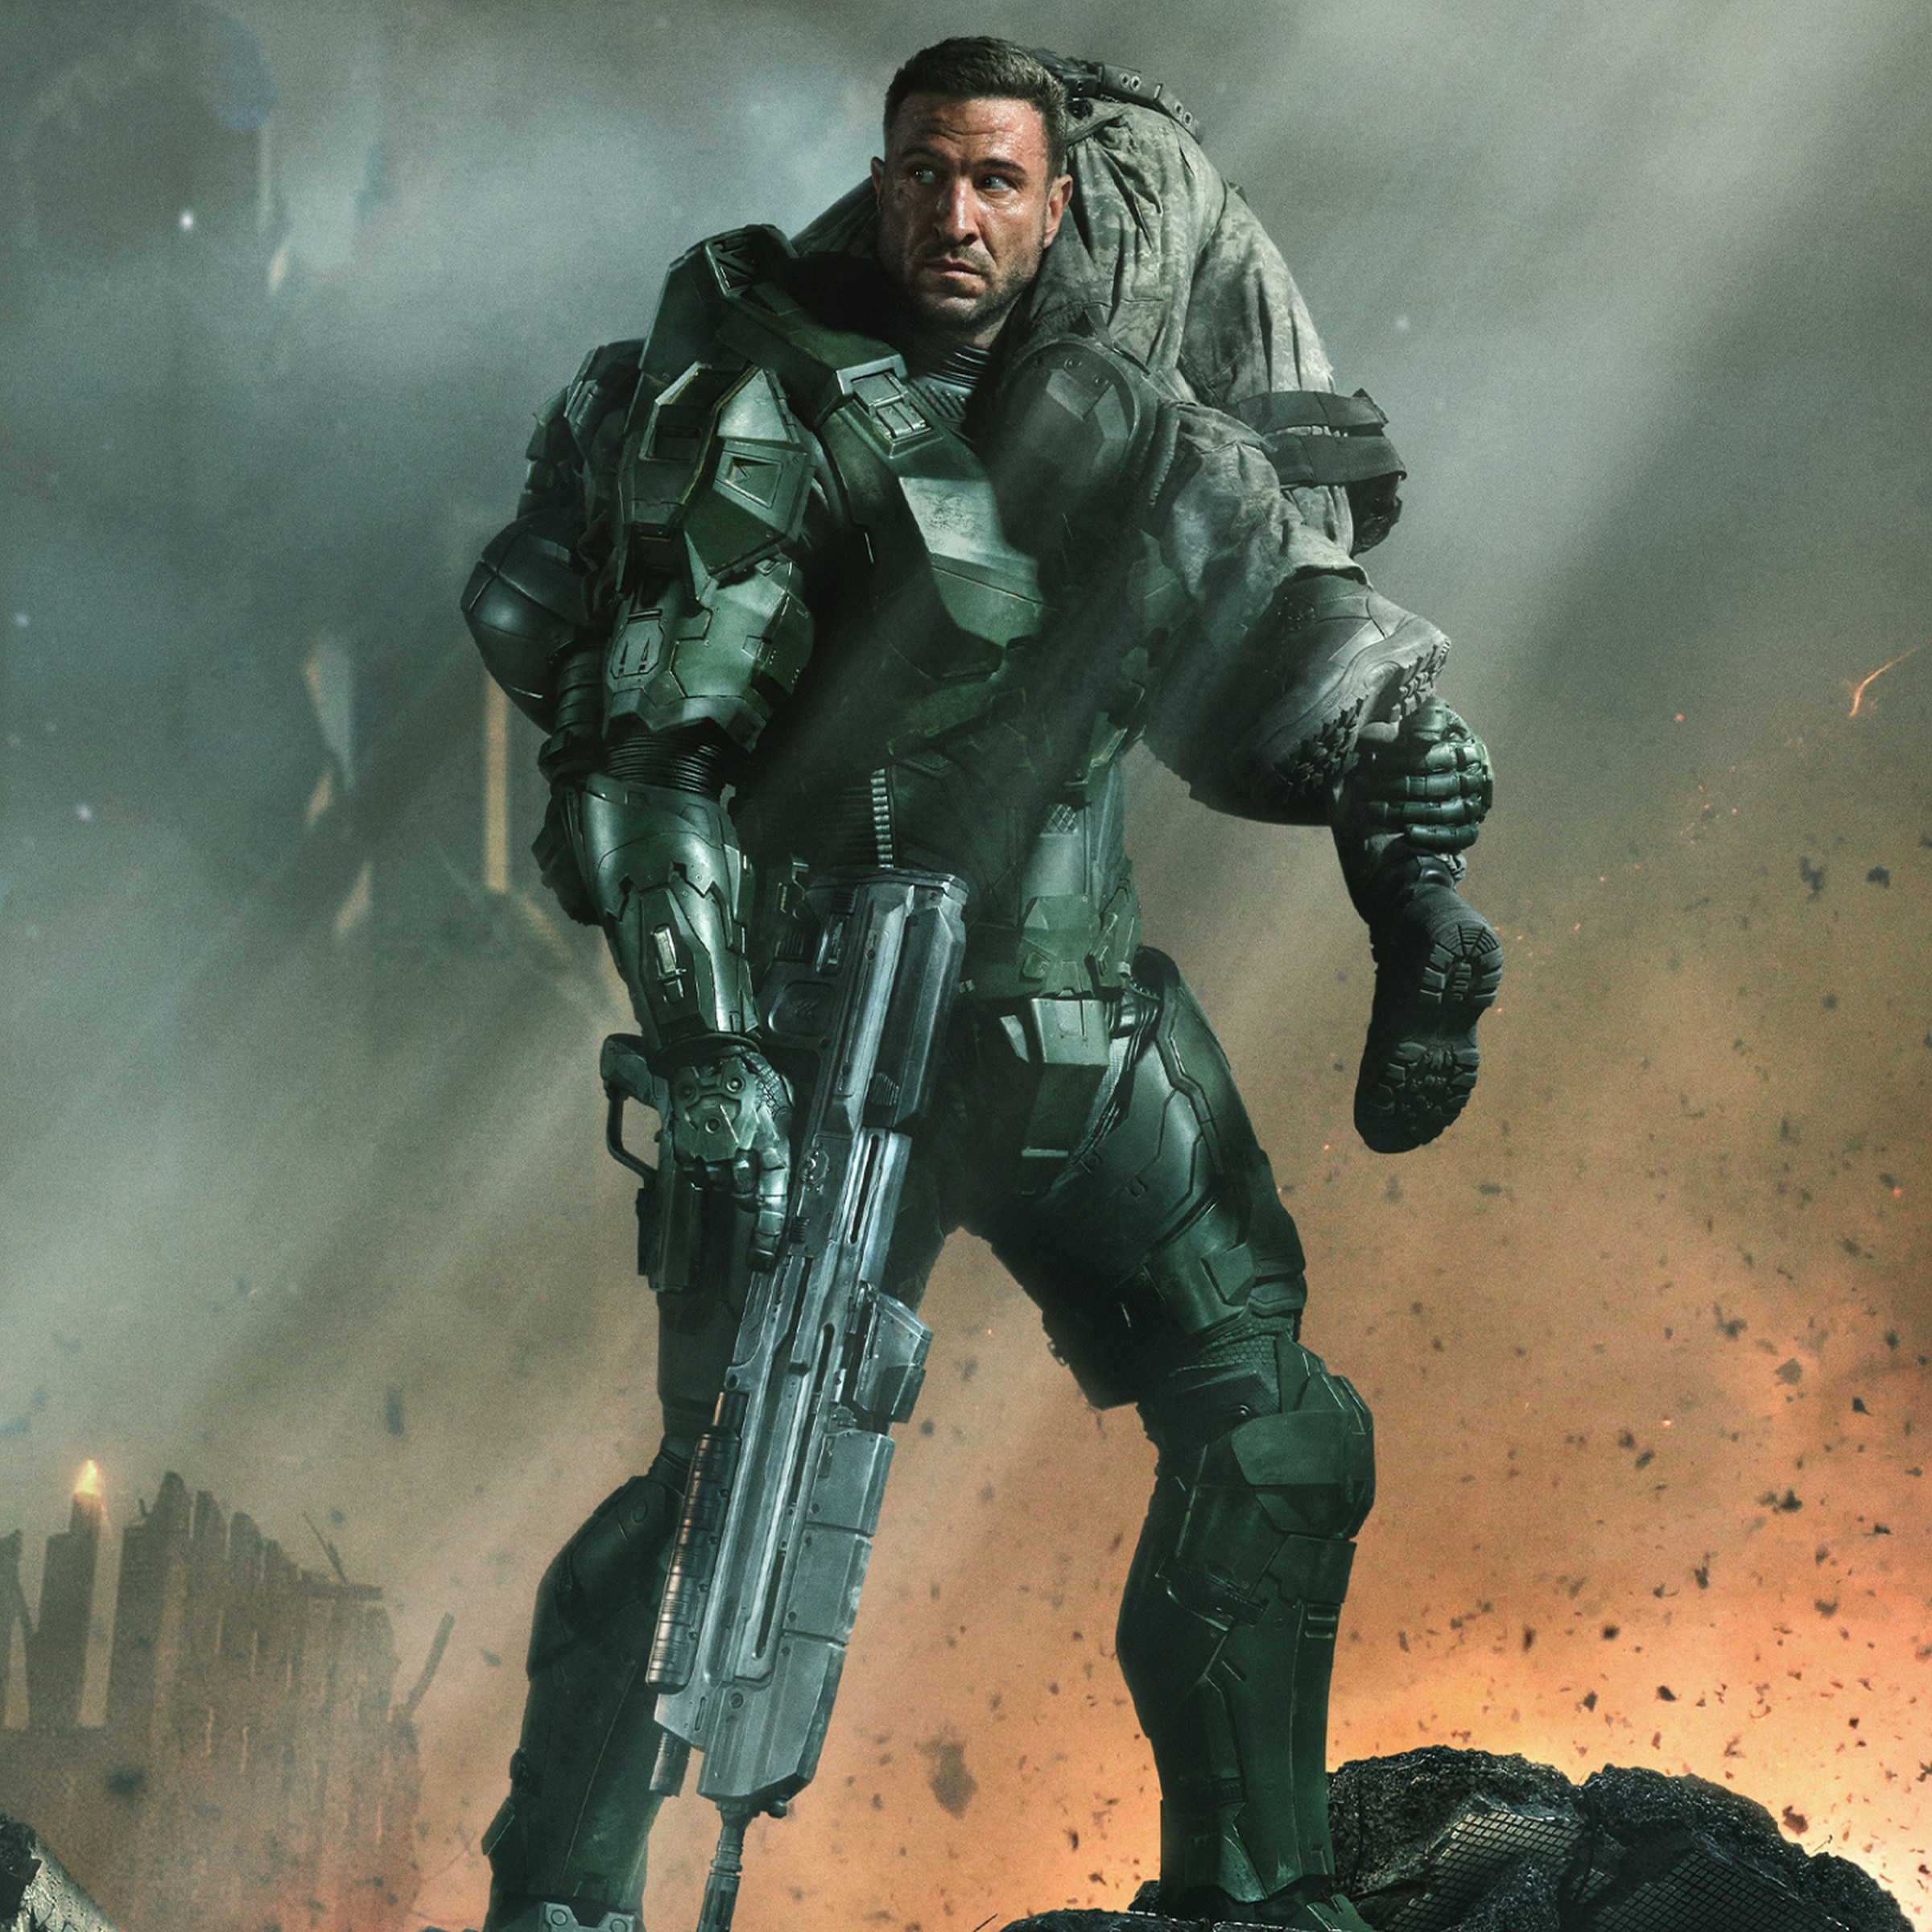 Promotional image from Halo season 2 featuring Master Chief against a war ravaged city carrying an injured civilian.